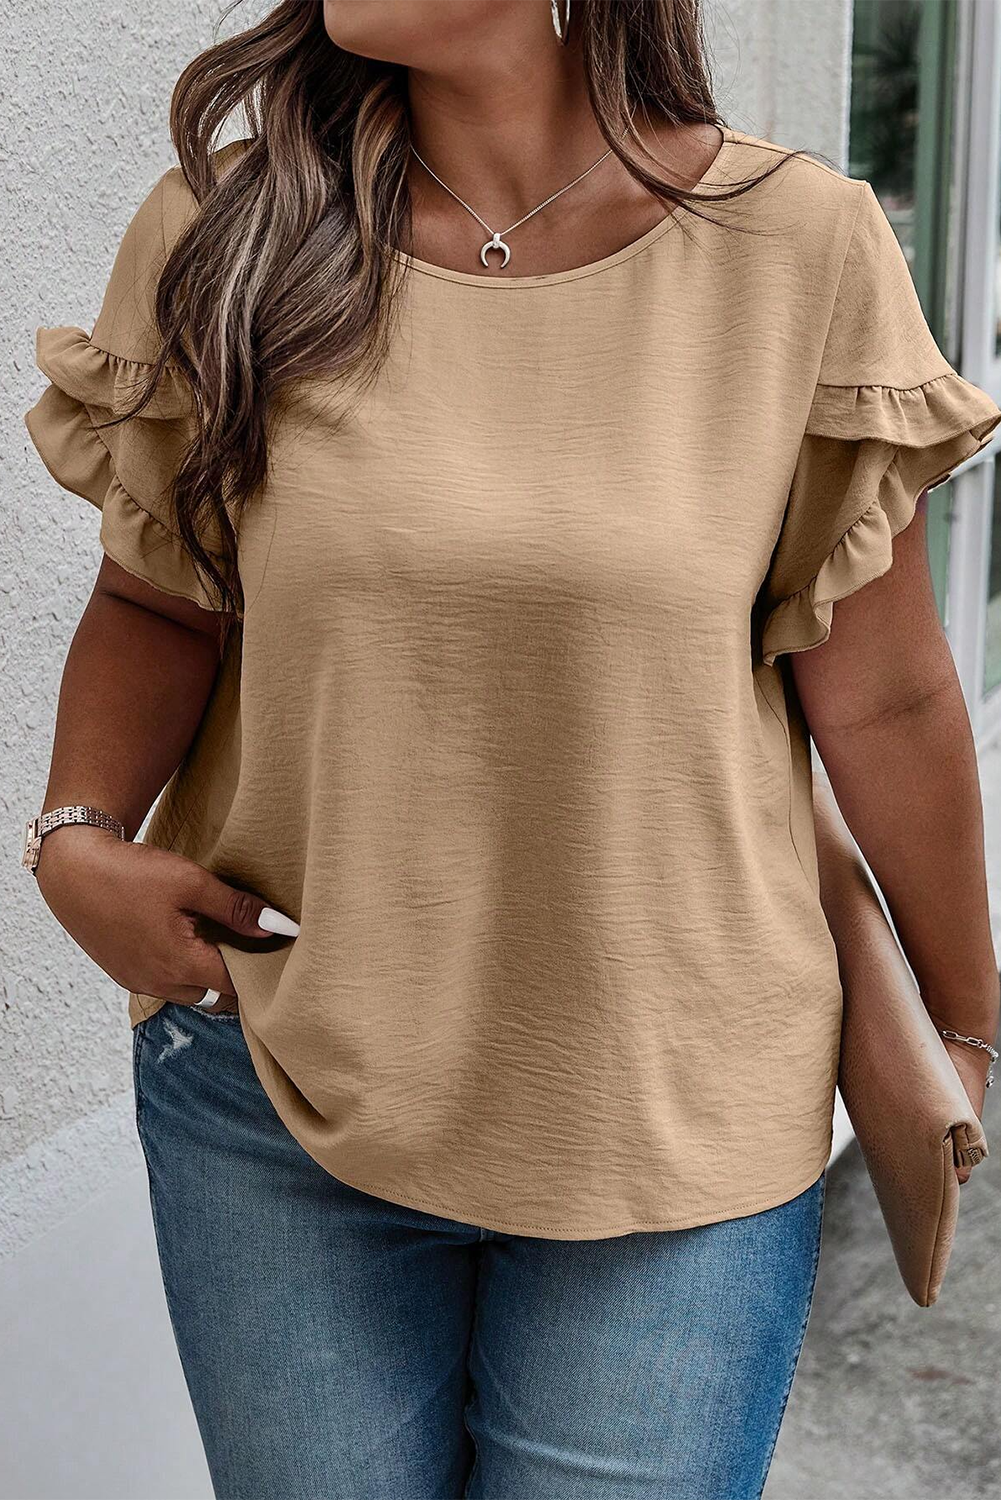 Shewin Wholesale WESTERN Light French Beige Ruffled Short Sleeve Plus Size Top